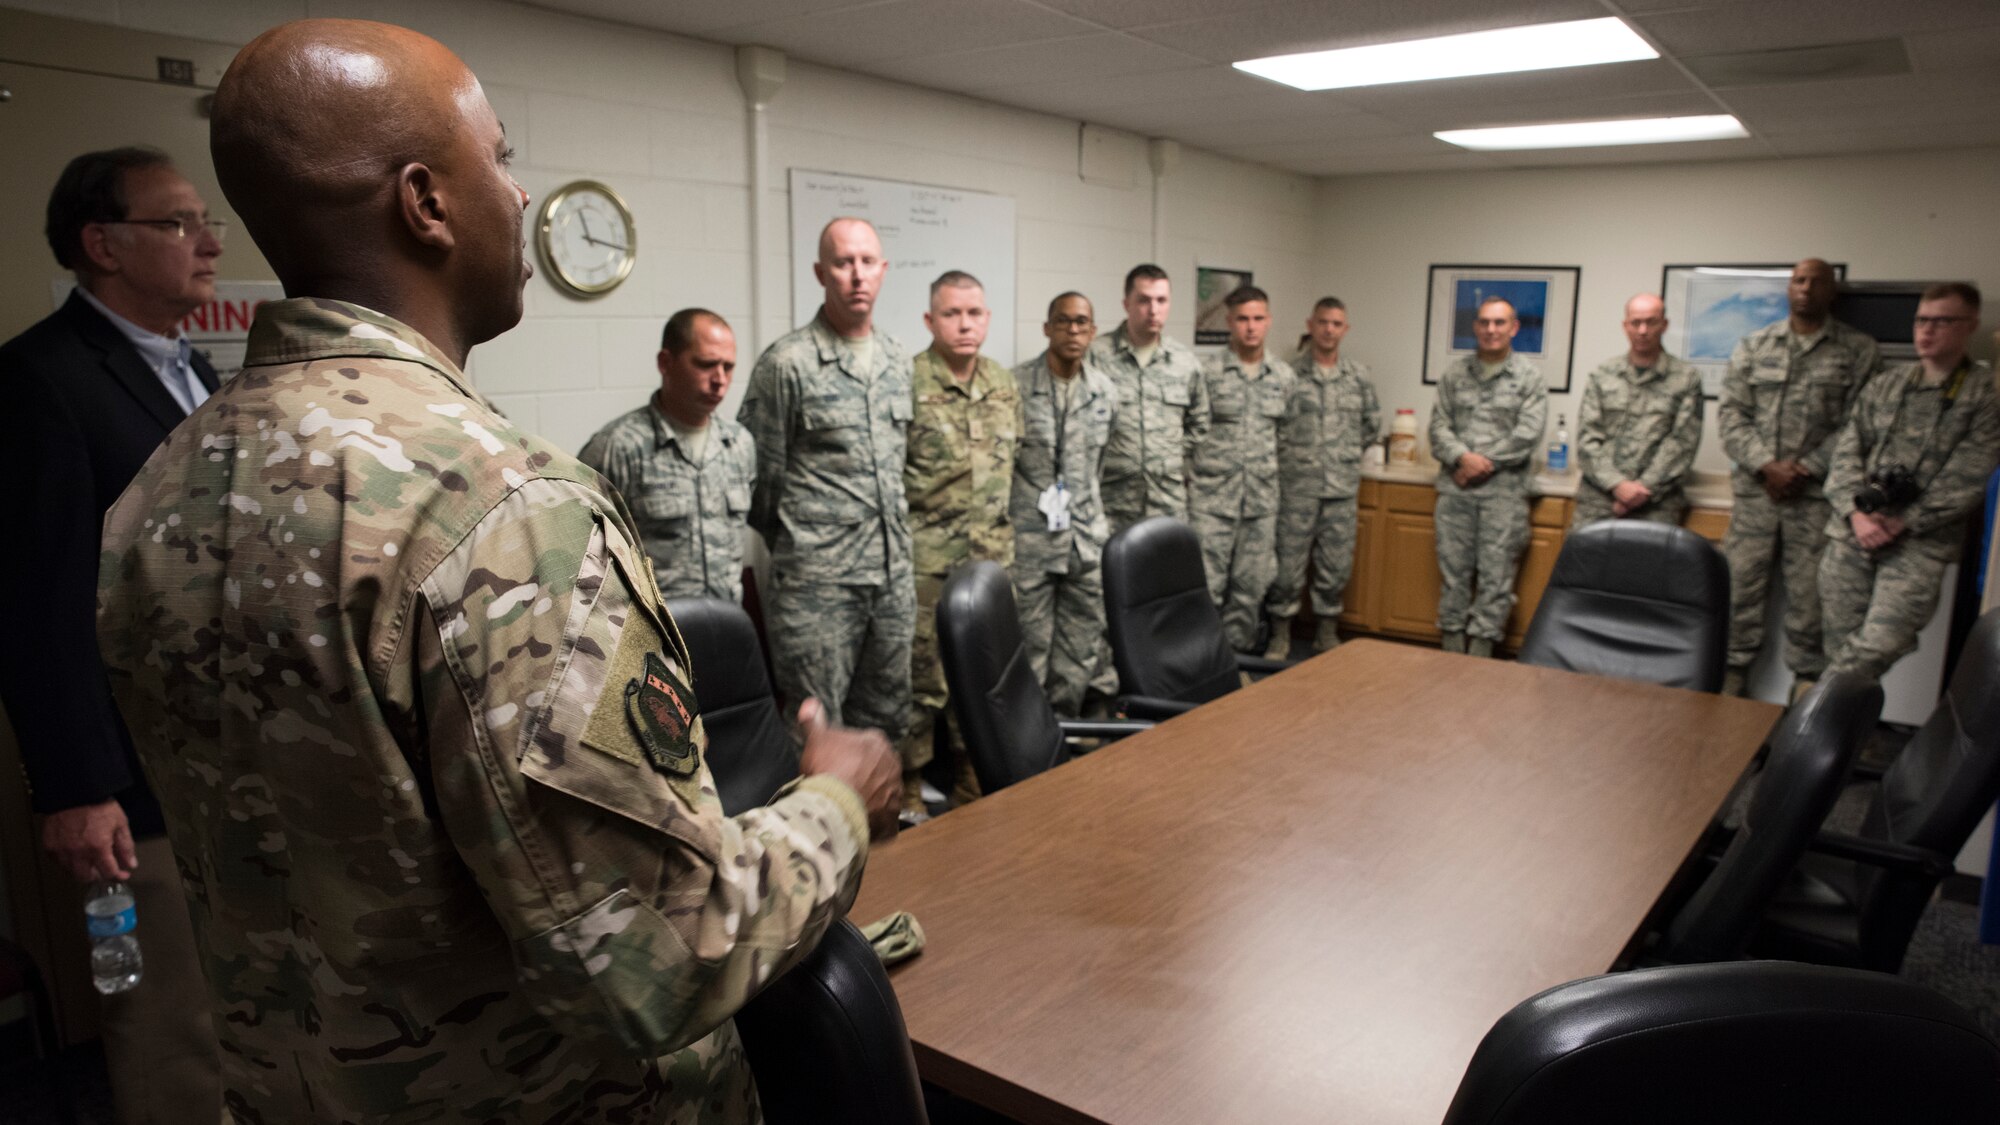 U.S. Sen John Boozman, Ark., and Chief Master Sergeant of the Air Force Kaleth O. Wright meet with members of the 188th Communications Squadron at Fort Smith, Ark., Oct. 5, 2019. Boozman and Wright talk about the future of the Arkansas Air National Guard and answered questions from wing members. (U.S. Air National Guard photo by Tech. Sgt. Daniel J. Condit)